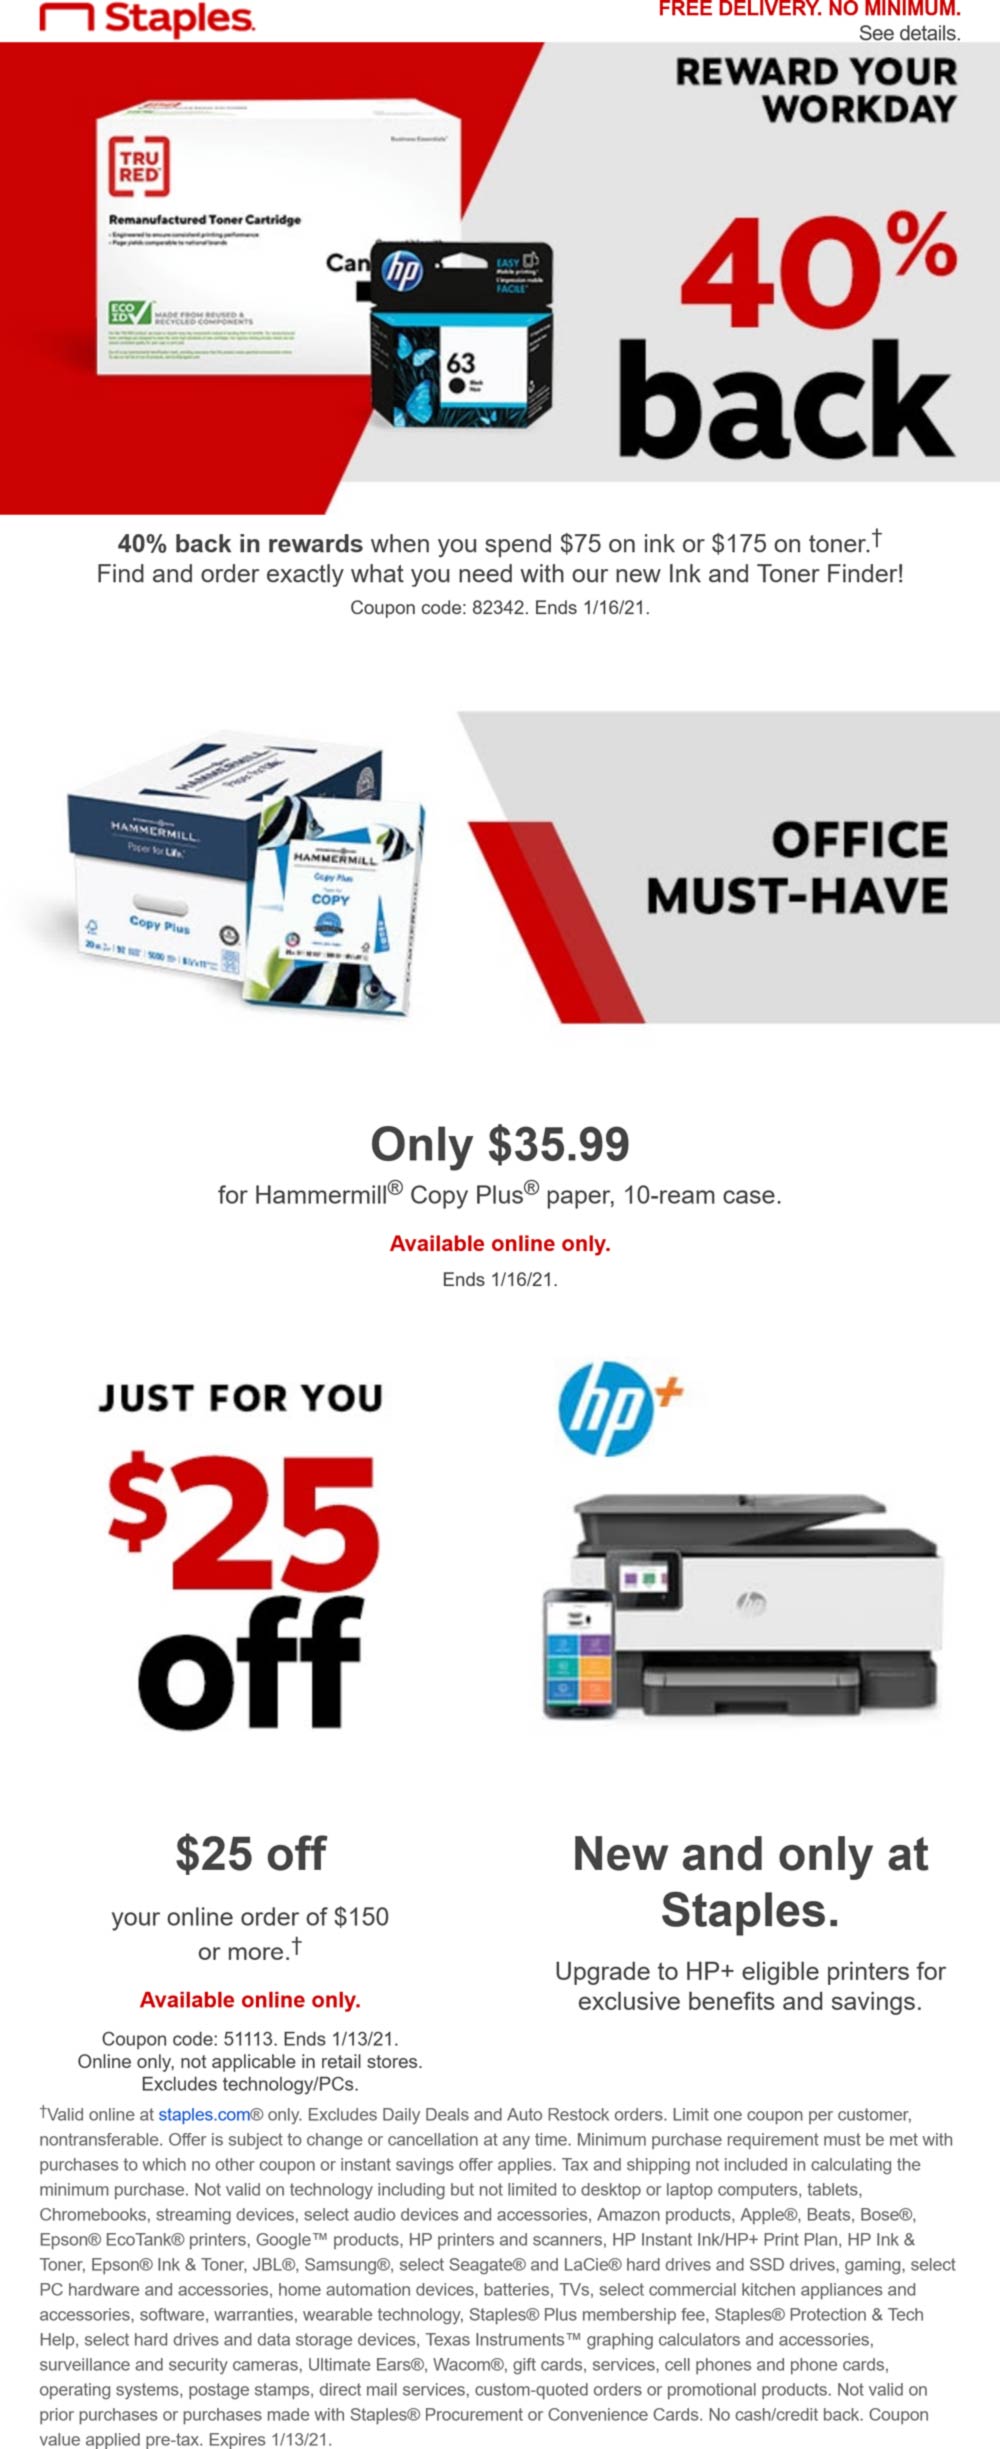 25 off 150 today online at Staples via promo code 51113 staples